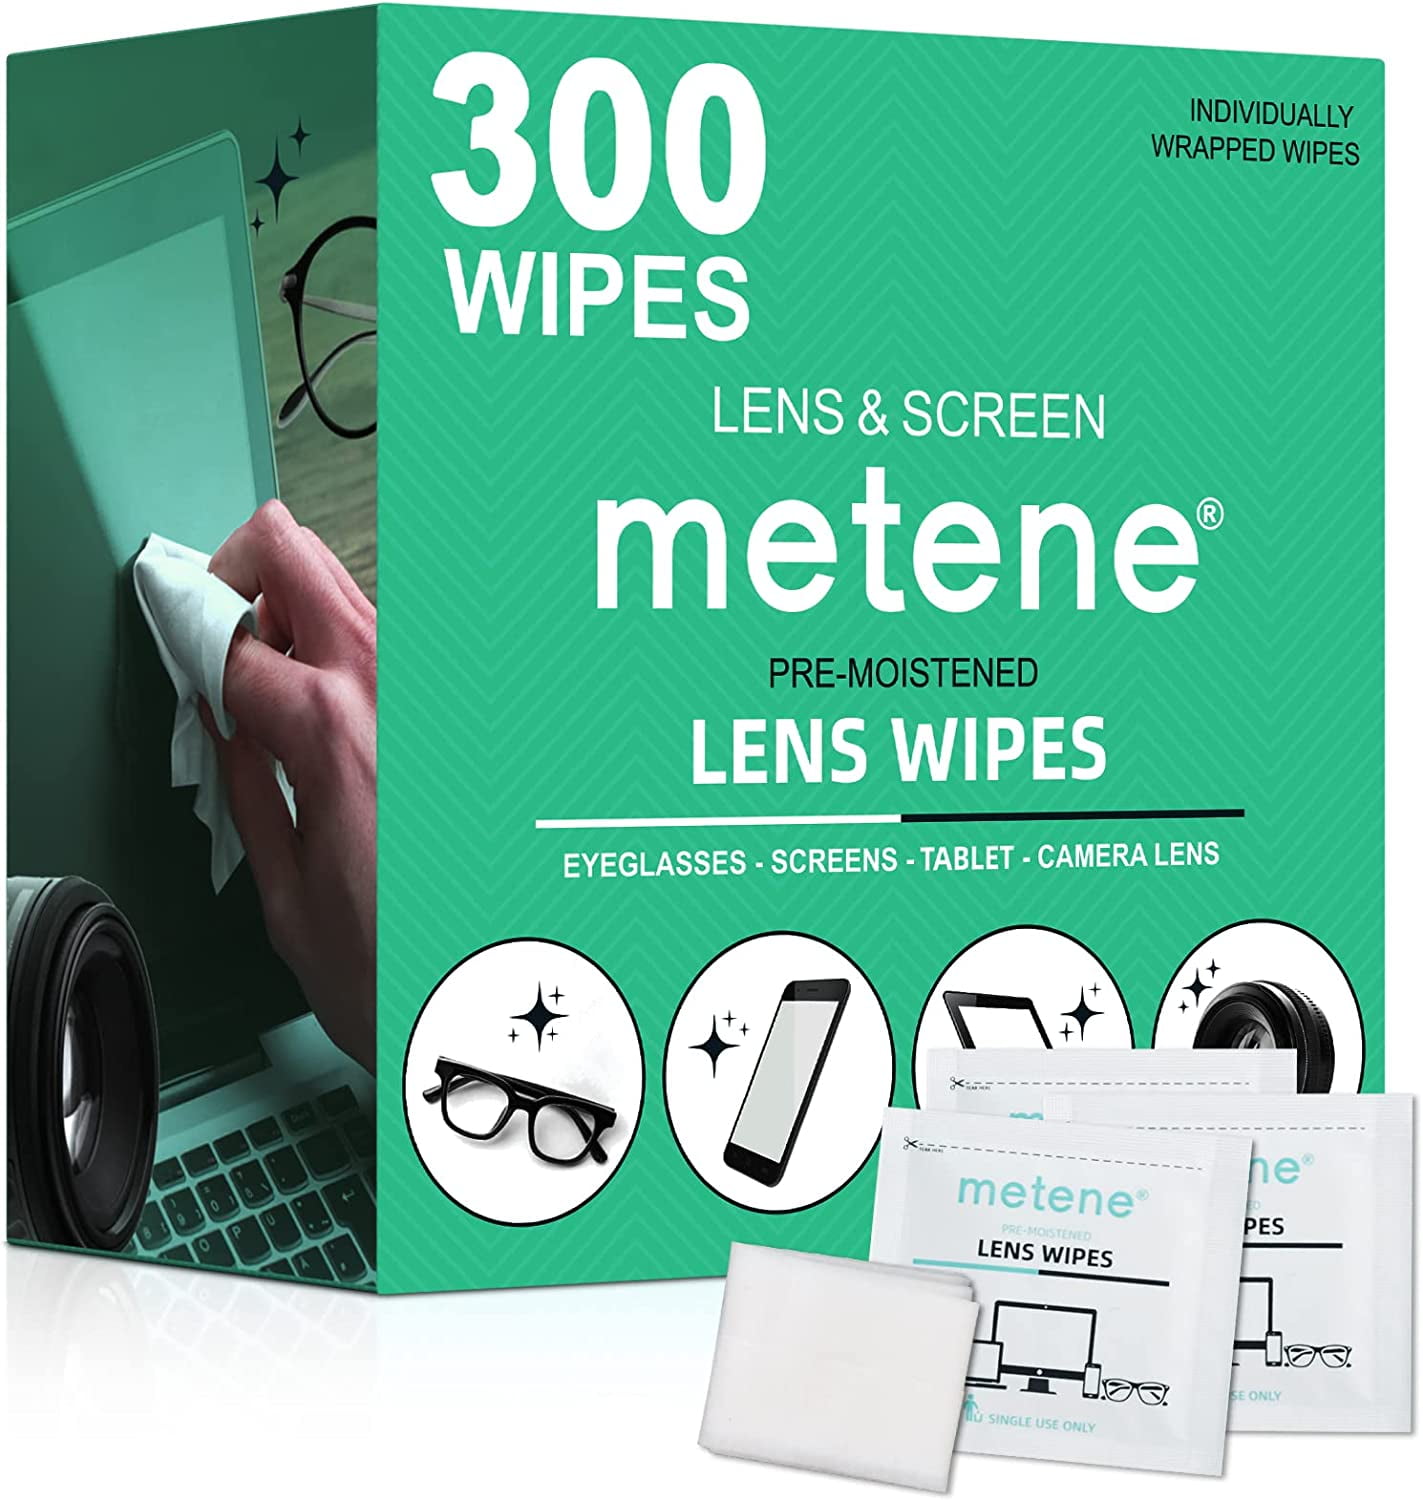 Lens Cleaning Wipes 220 Count, Pre-Moistened and Individually Wrapped,  Cleans Eyeglasses, Lenses, Glasses, Screens, Cameras, iPad, iPhone,  Eyeglasses